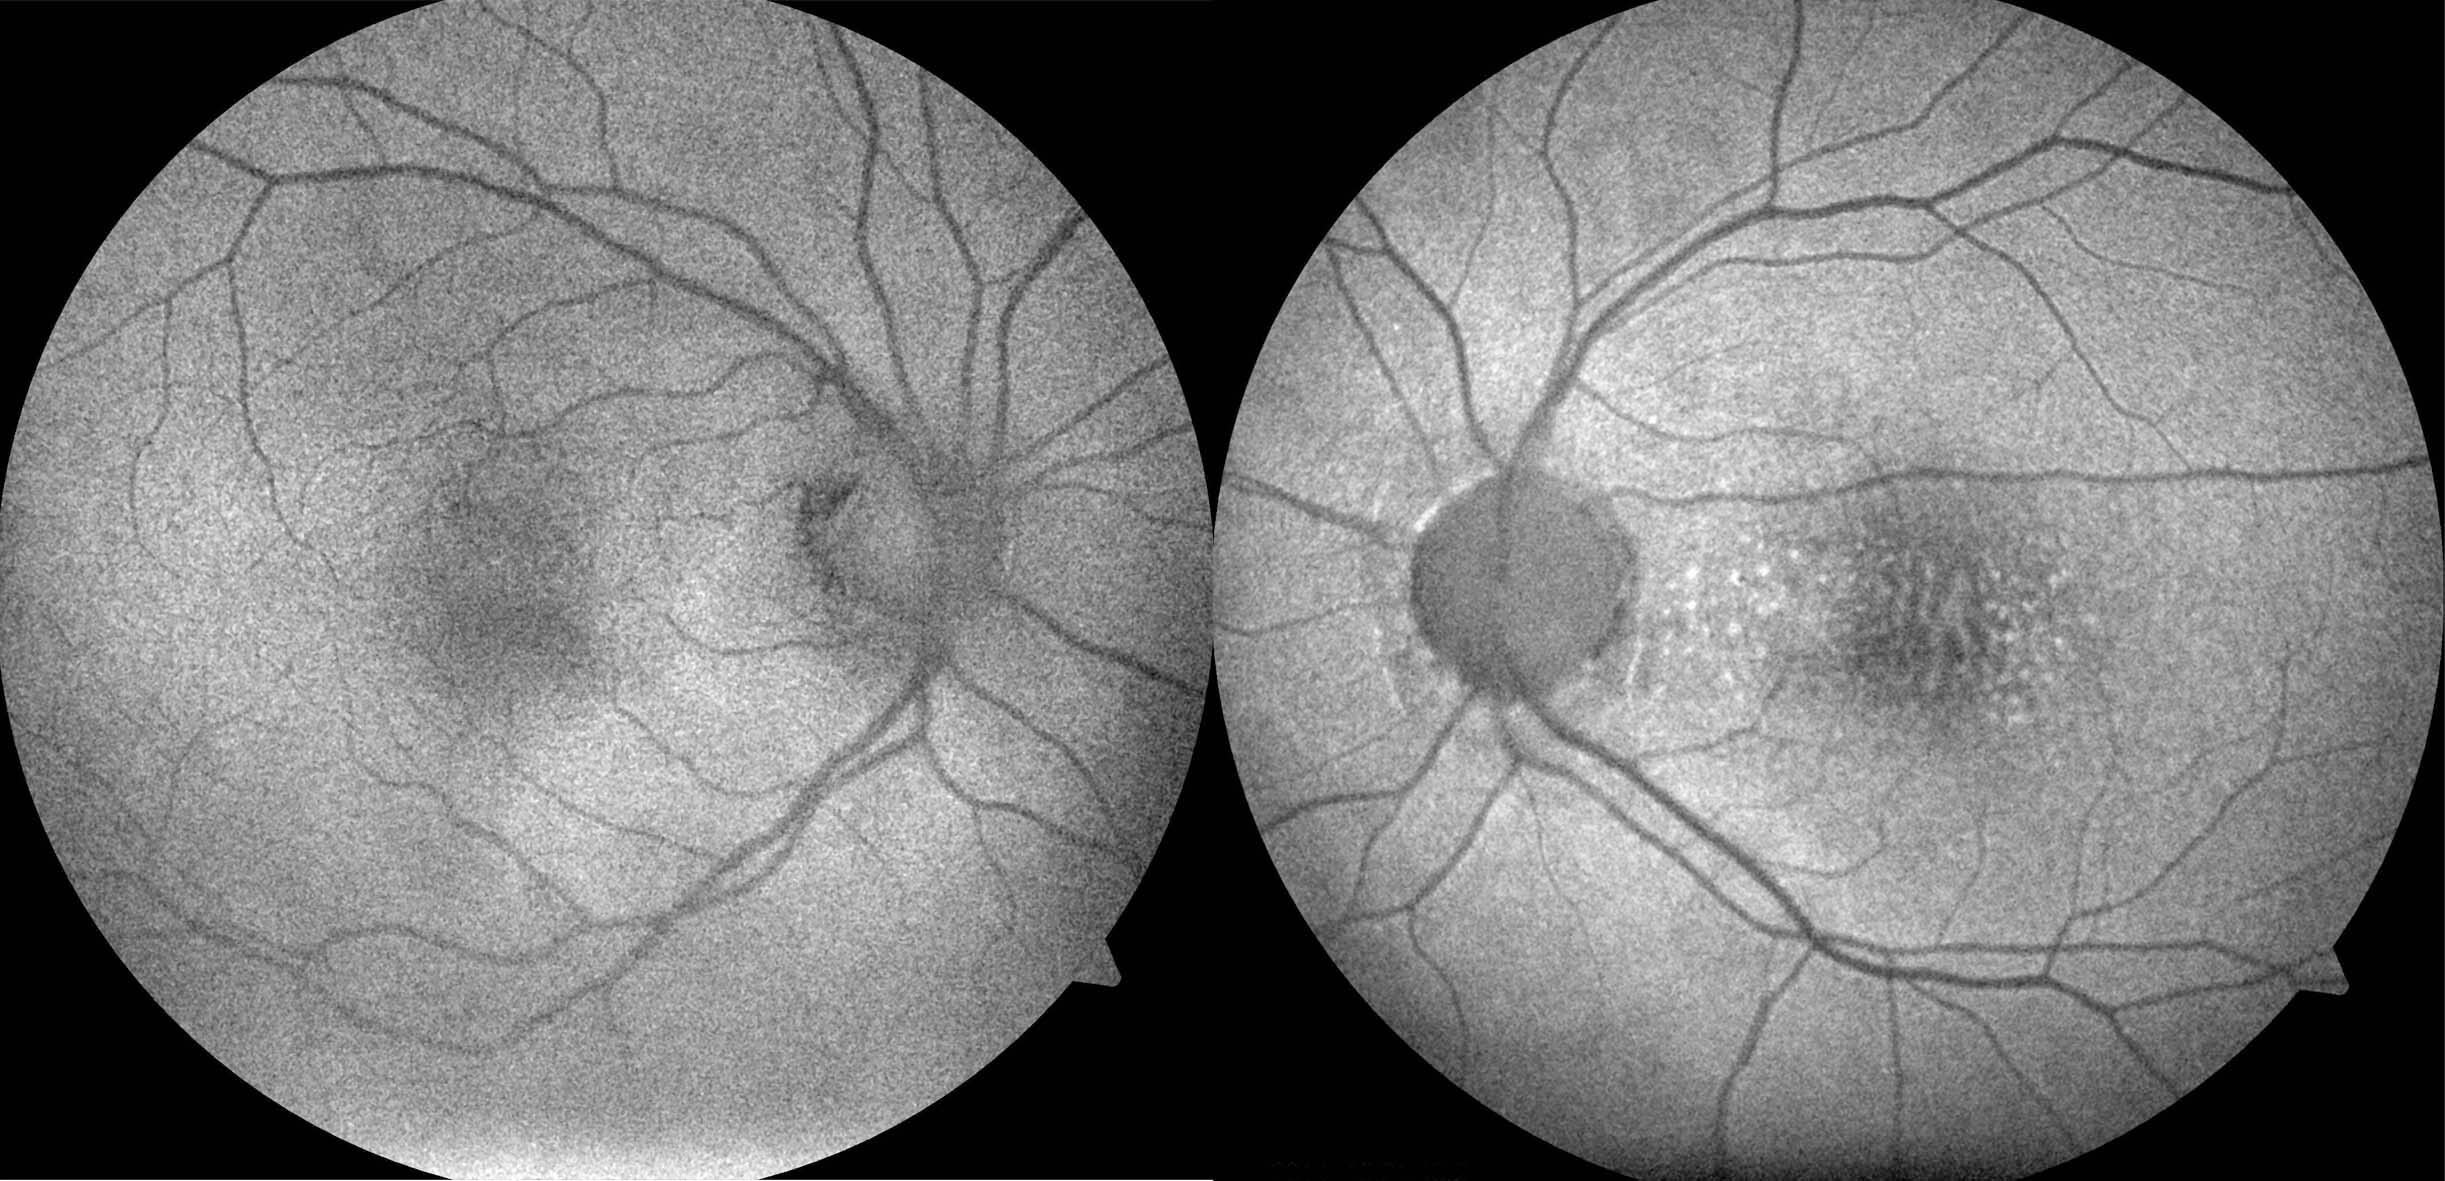 Fundus autofluorescence highlights the macular deposits in the left eye.